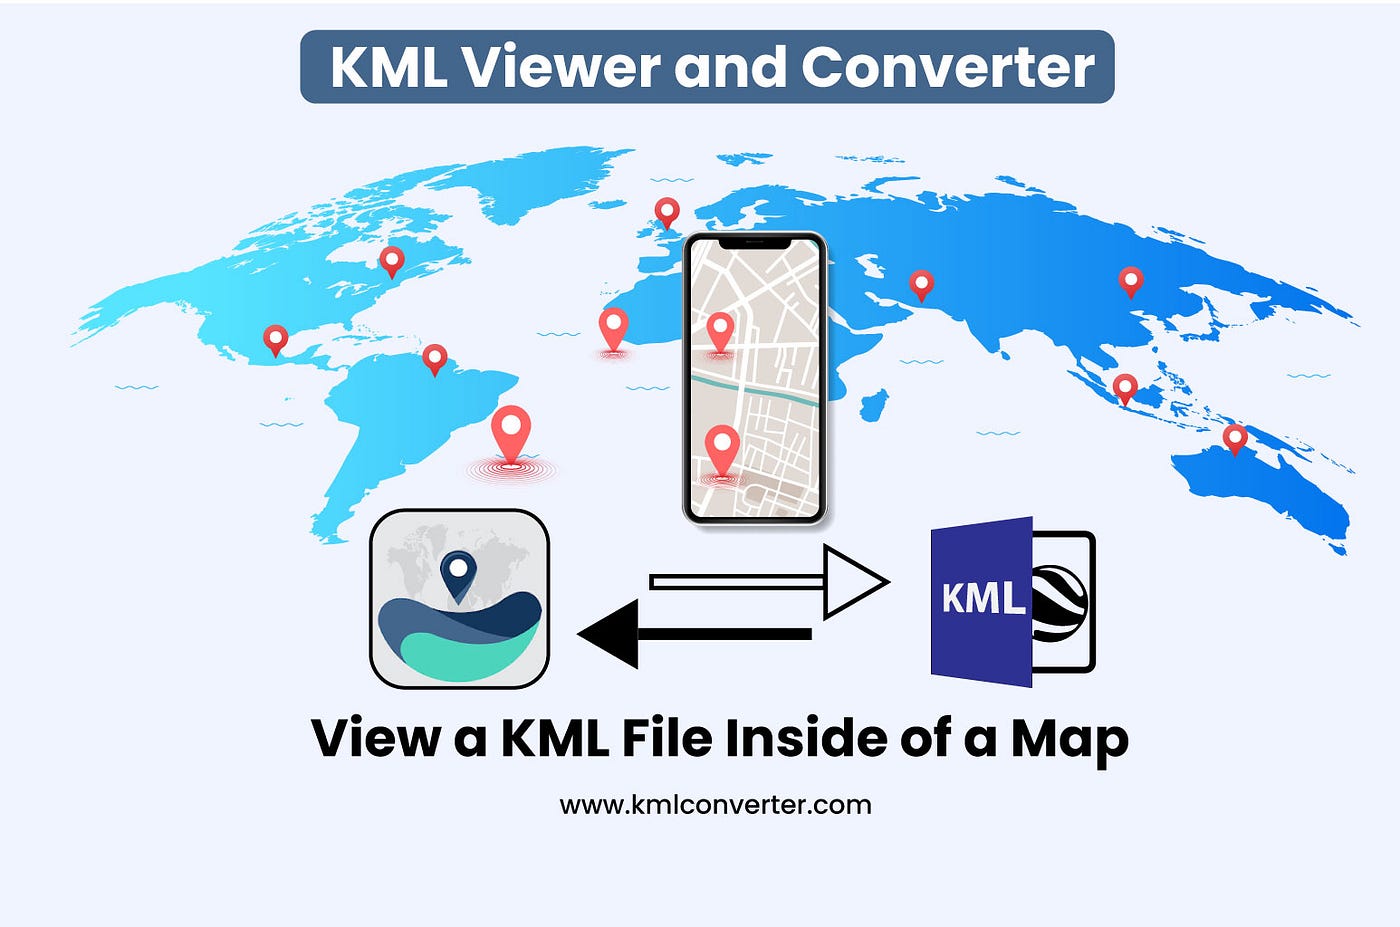 View a KML File Inside of a Map. In a MAP, upload or import a KML file… |  by Kml Converter | Jun, 2022 | Medium